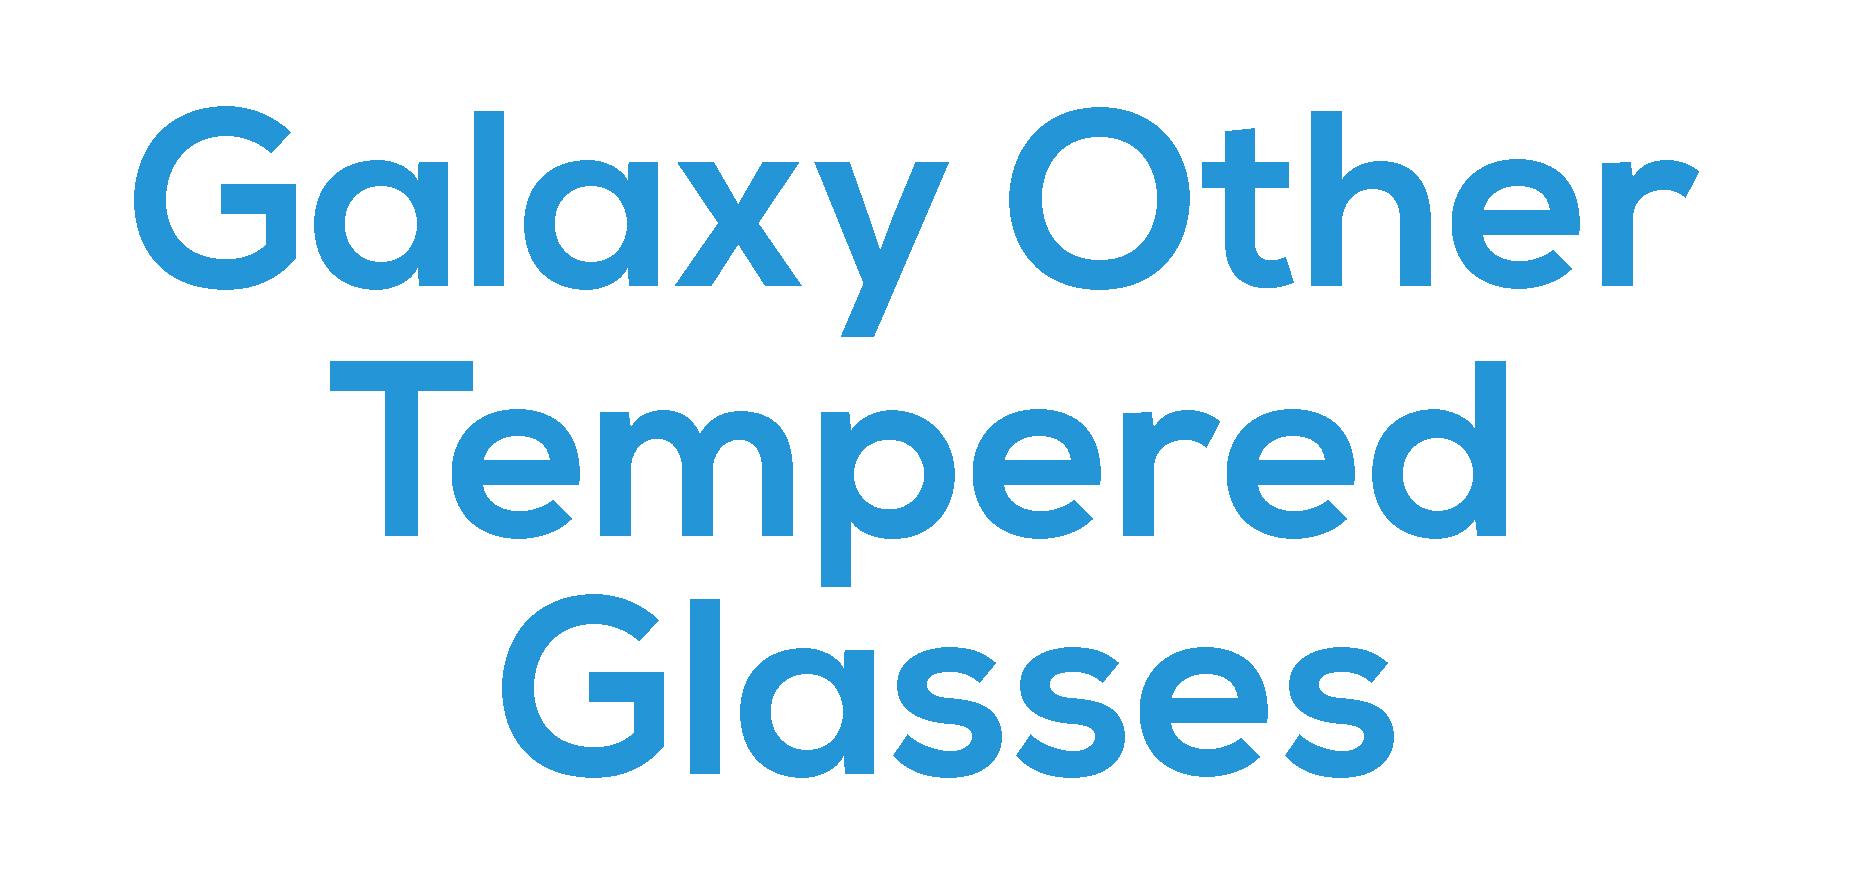 Galaxy Other Tempered Glasses